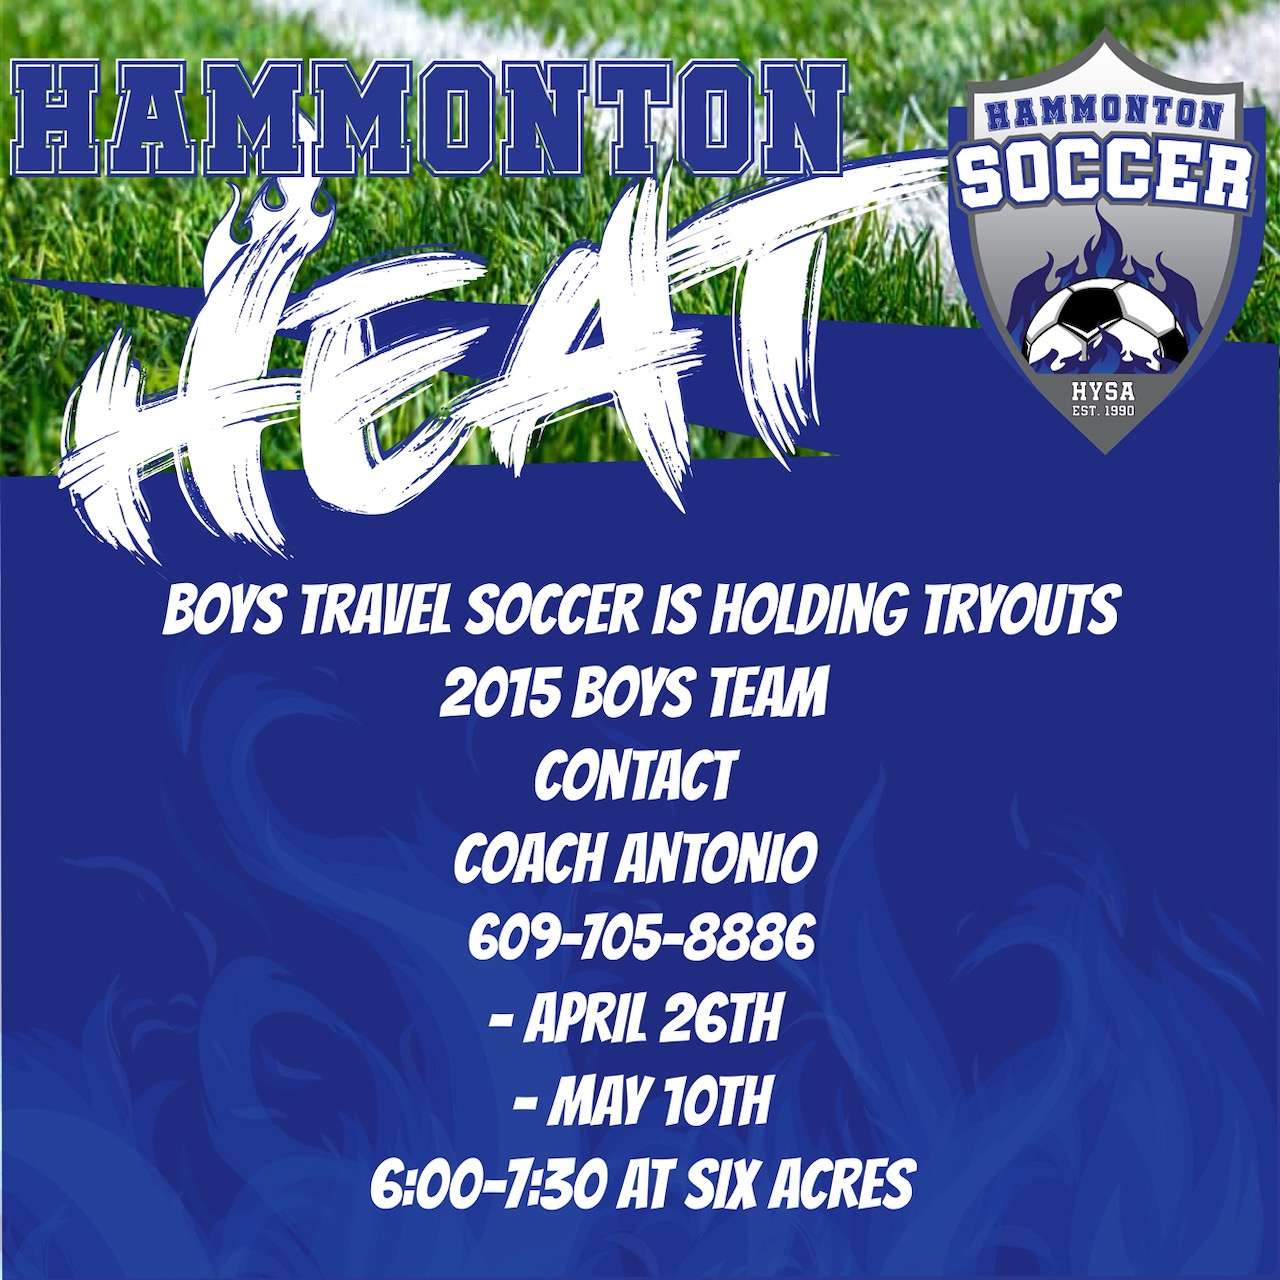 2015 Boys Travel Soccer Tryouts